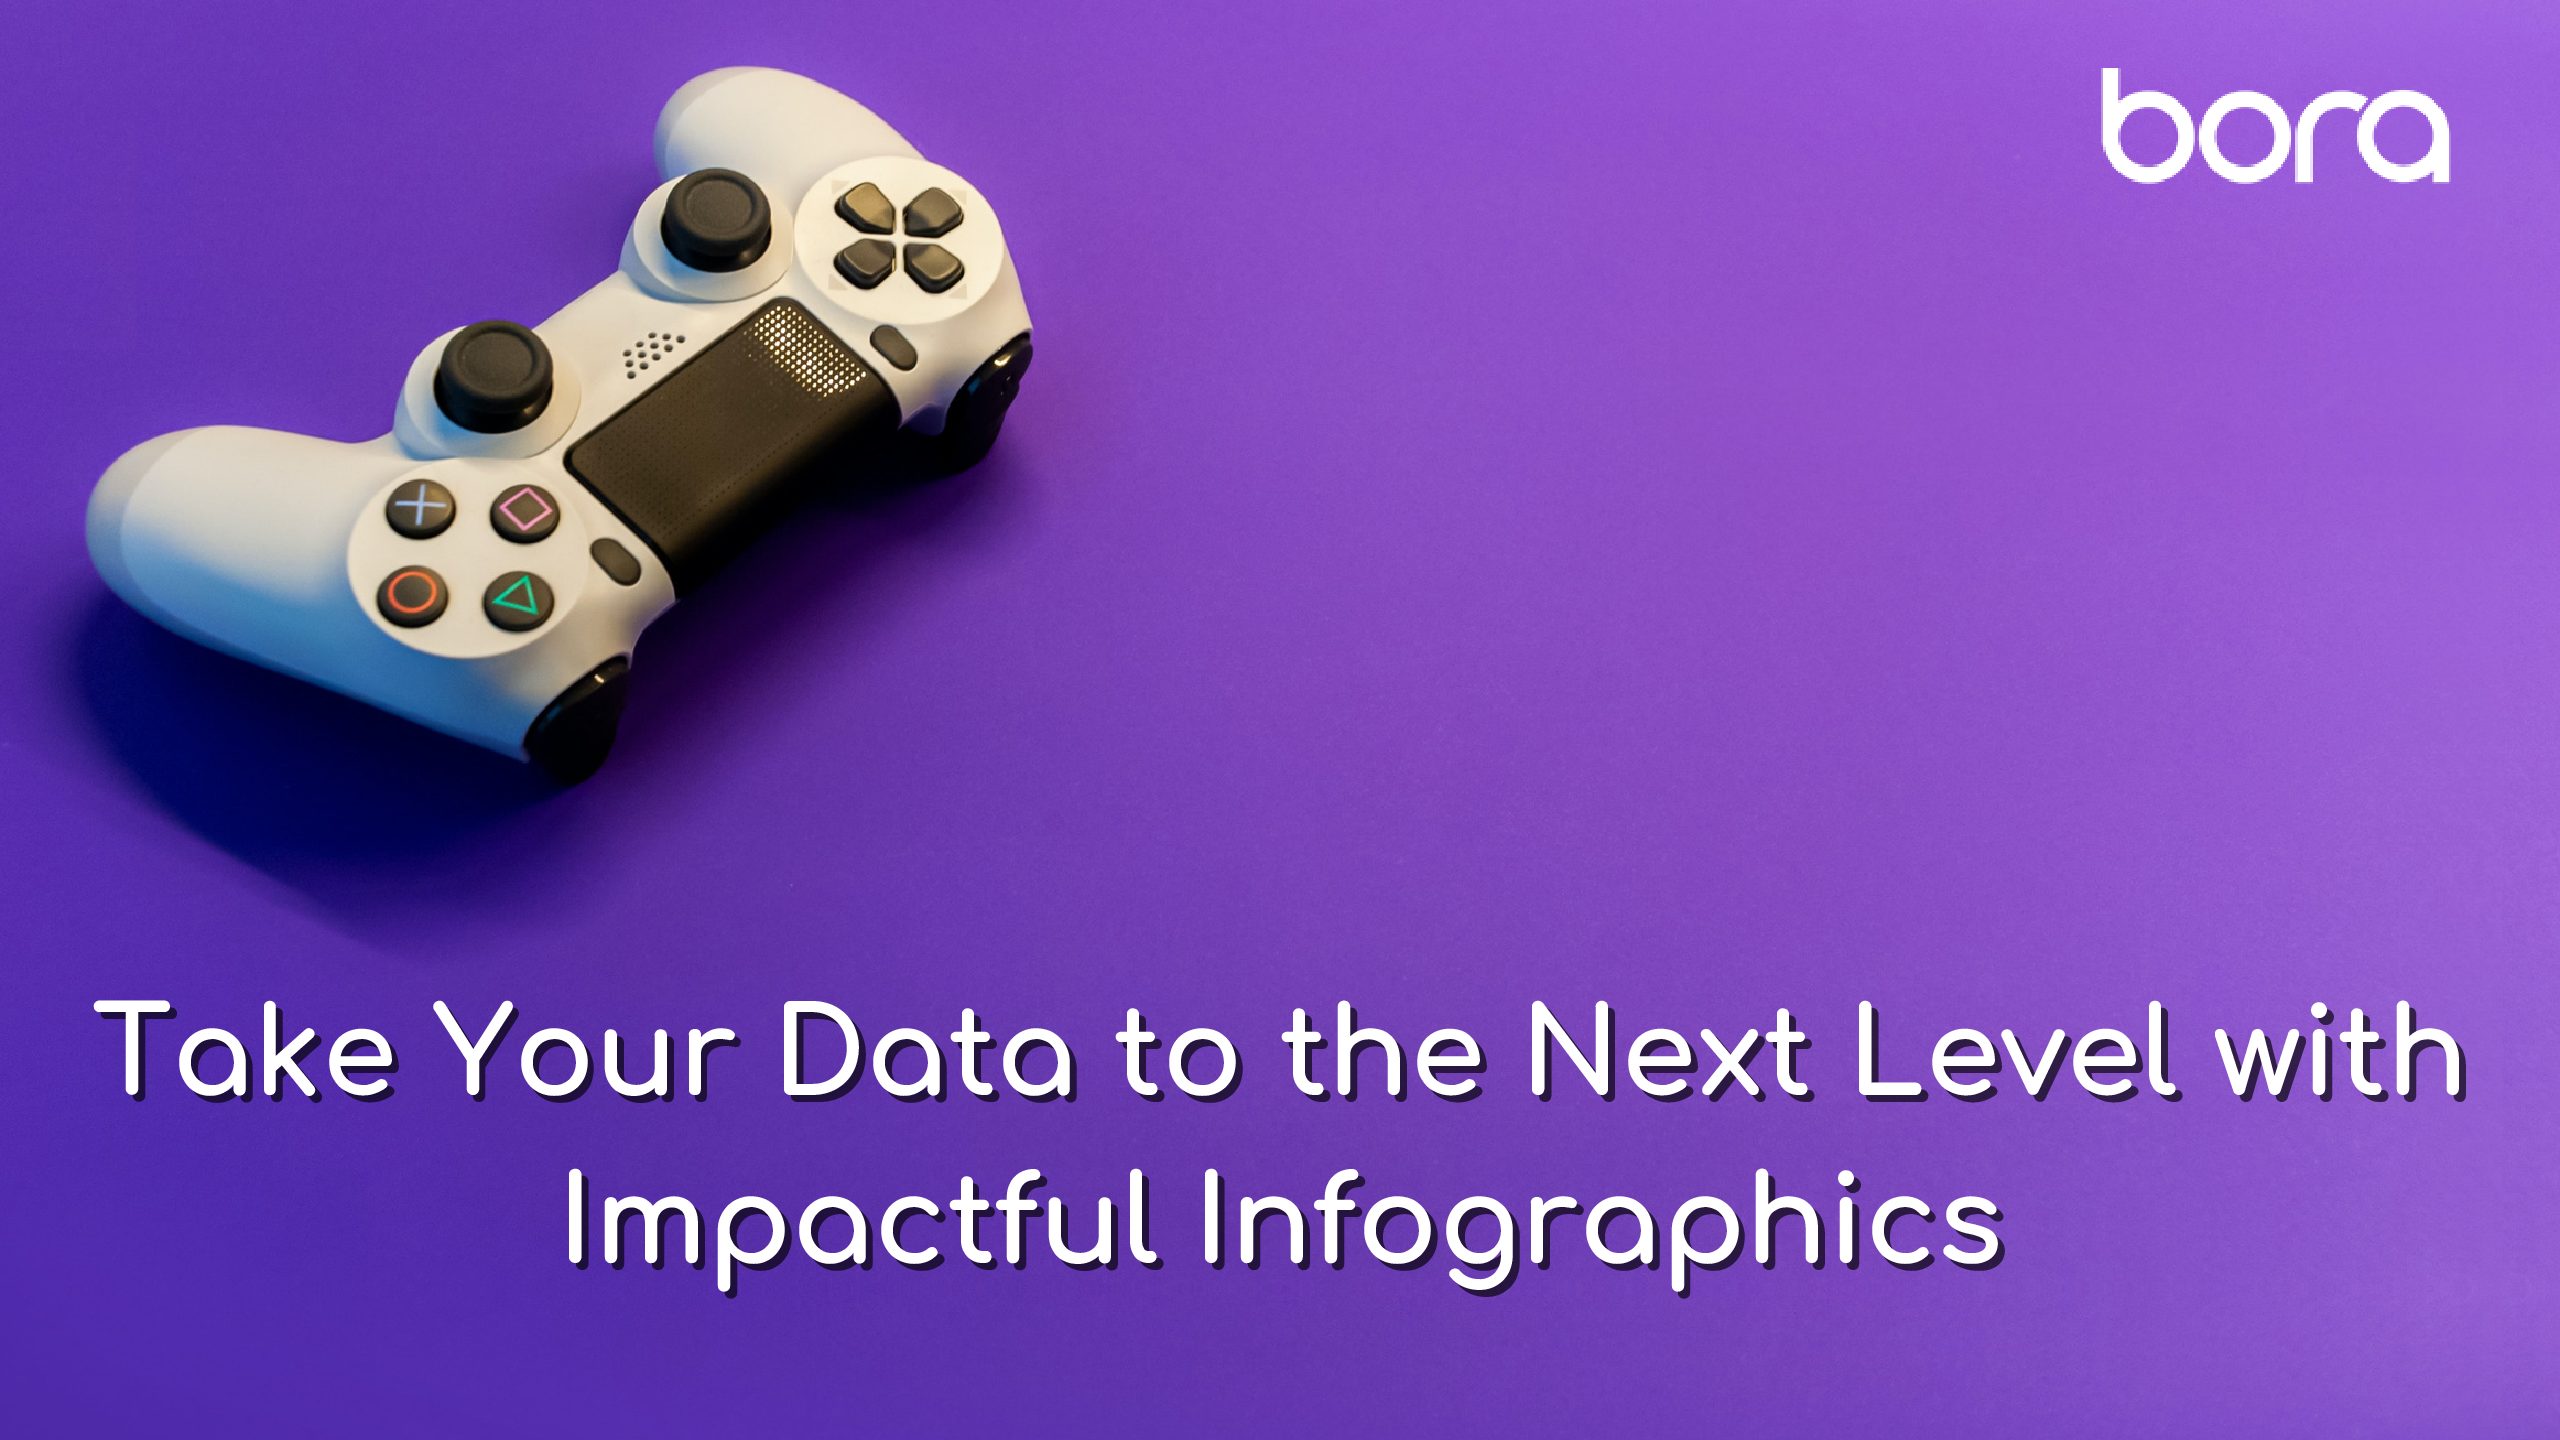 Take Your Data to the Next Level with Impactful Infographics